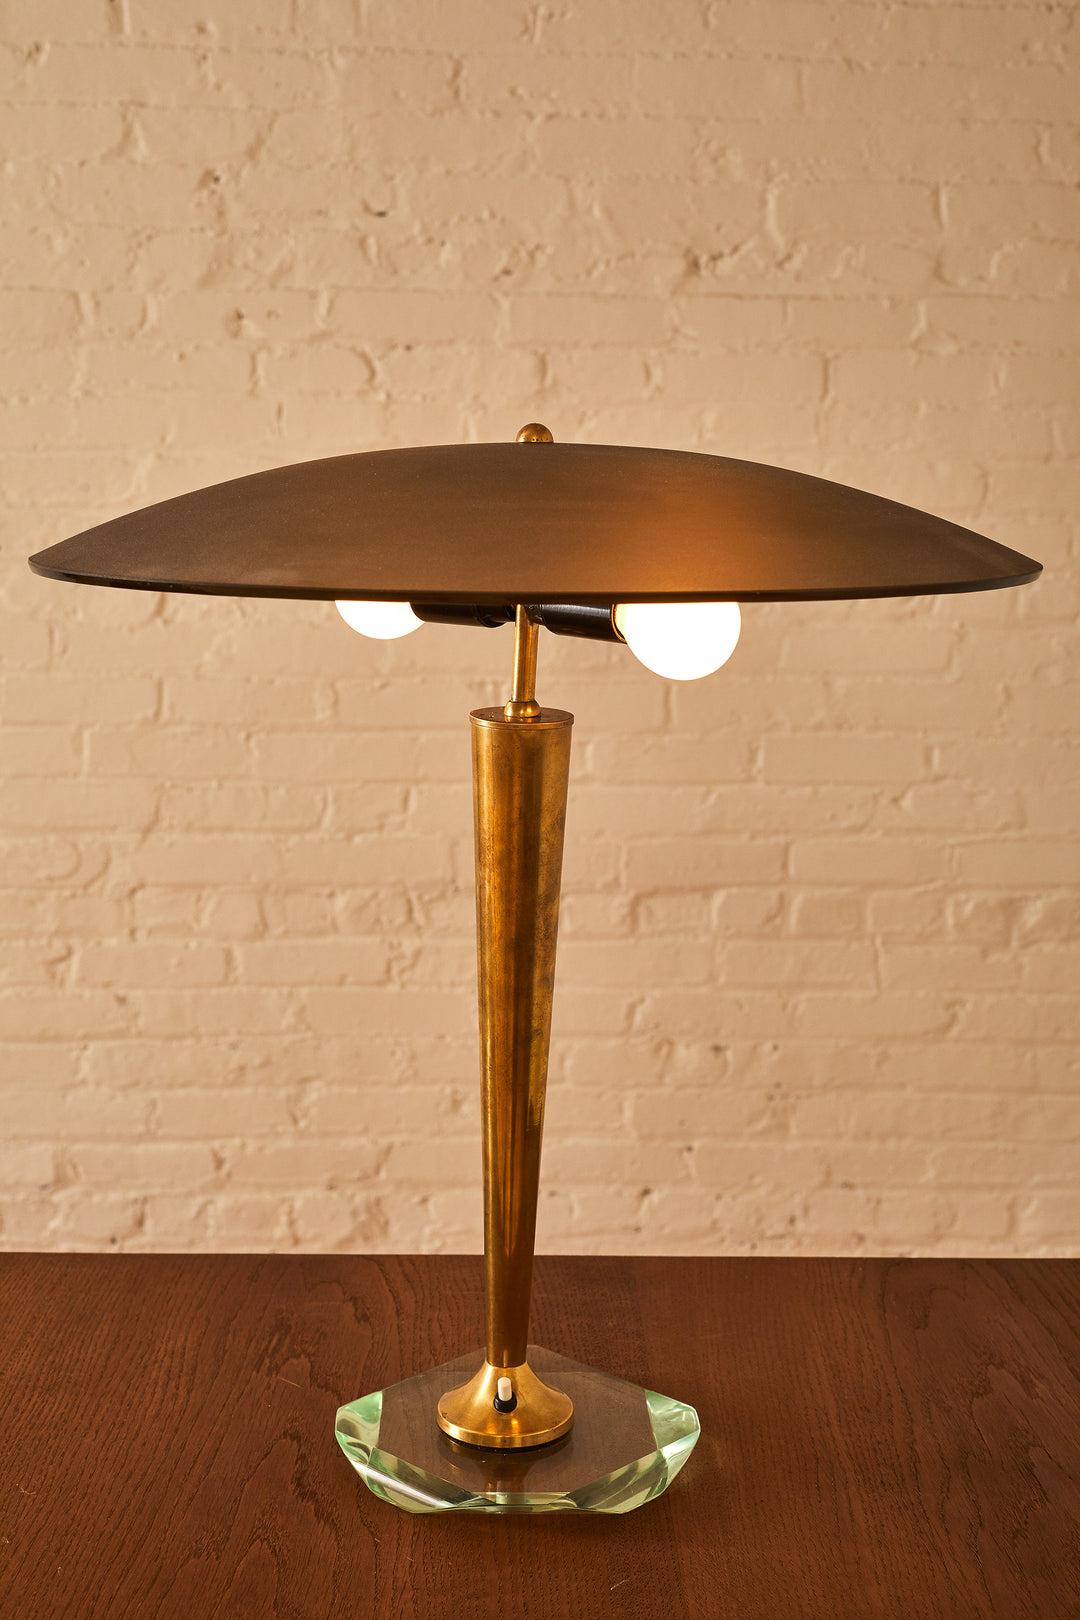 An elegant and rare table lamp attributed to Pietro Chiesa for Fontana Arte. The lamp features a crystal glass base, a tapered brass stem and a dark pink/grey smoked glass hat that can adjusted side to side. There is a light switch at the base that